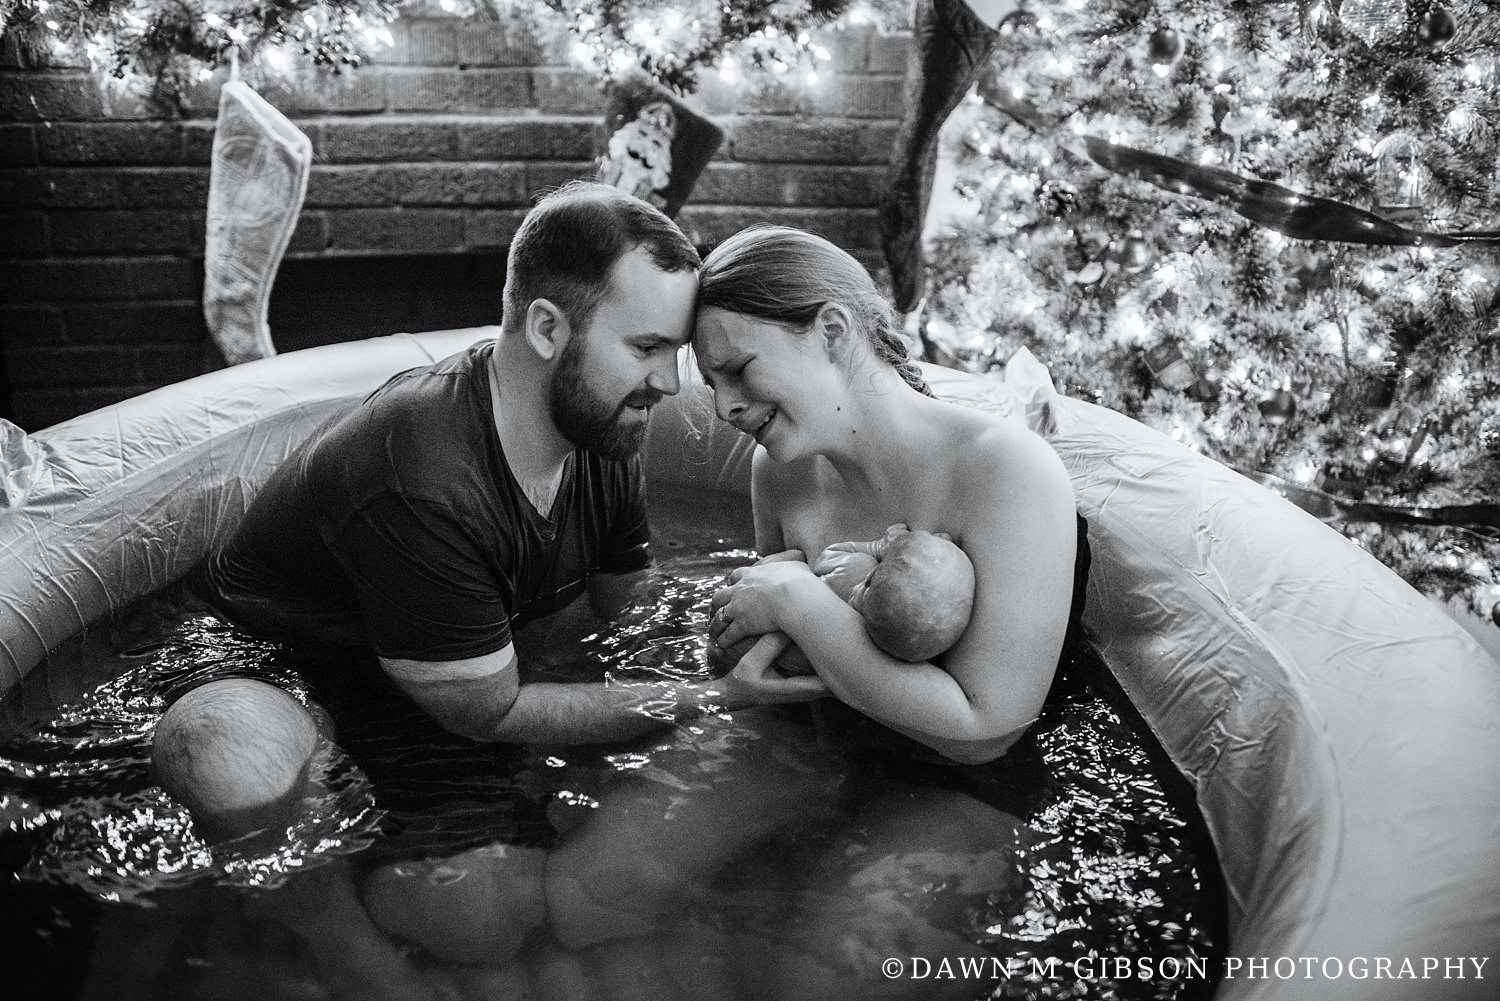 Birth Story Photos by Dawn M Gibson Photography